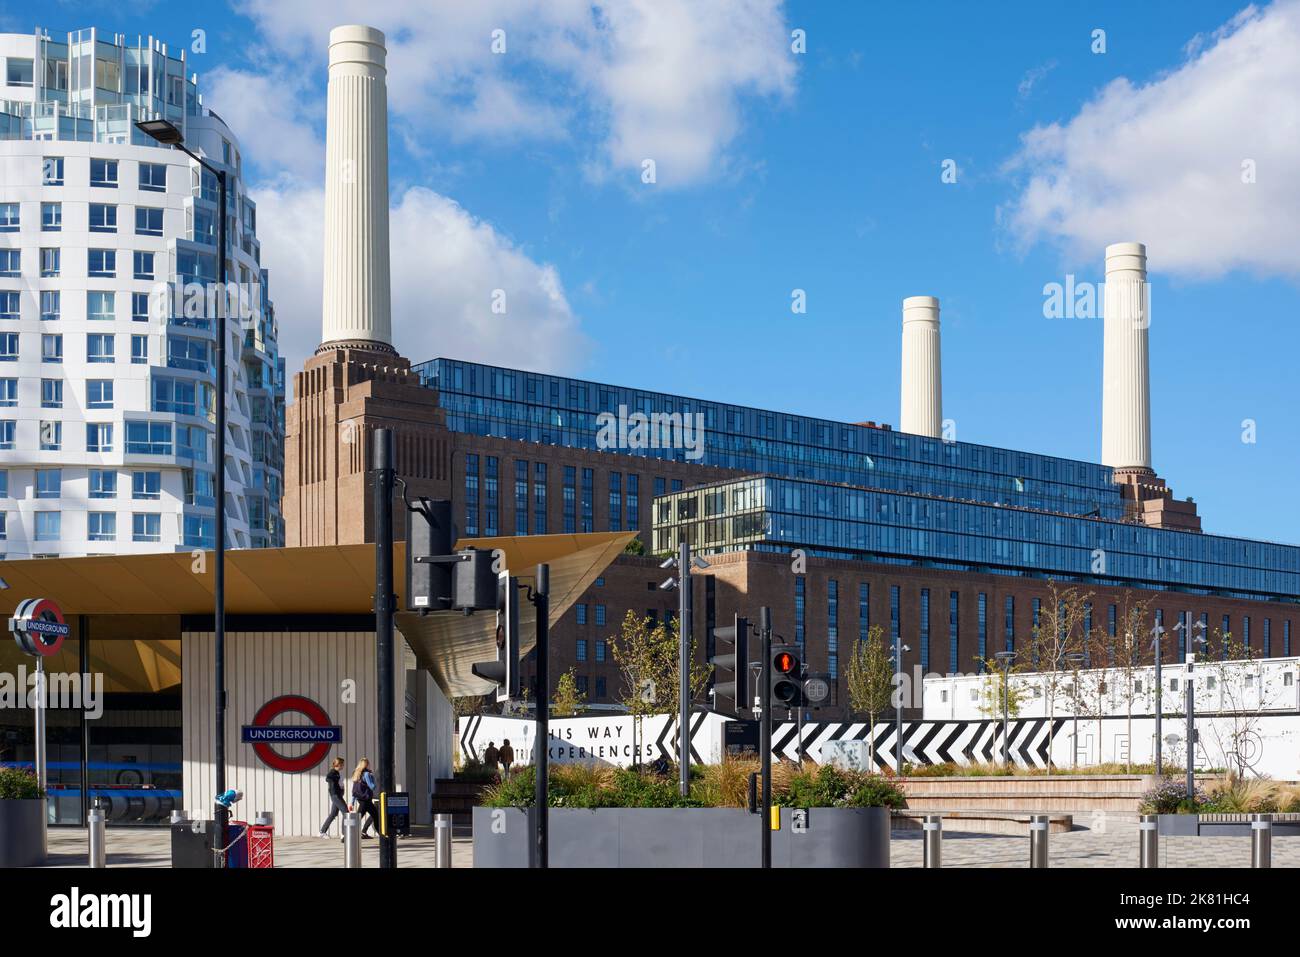 The entrance to Battersea Power Station underground, South London UK, with the newly redeveloped power station in the background Stock Photo